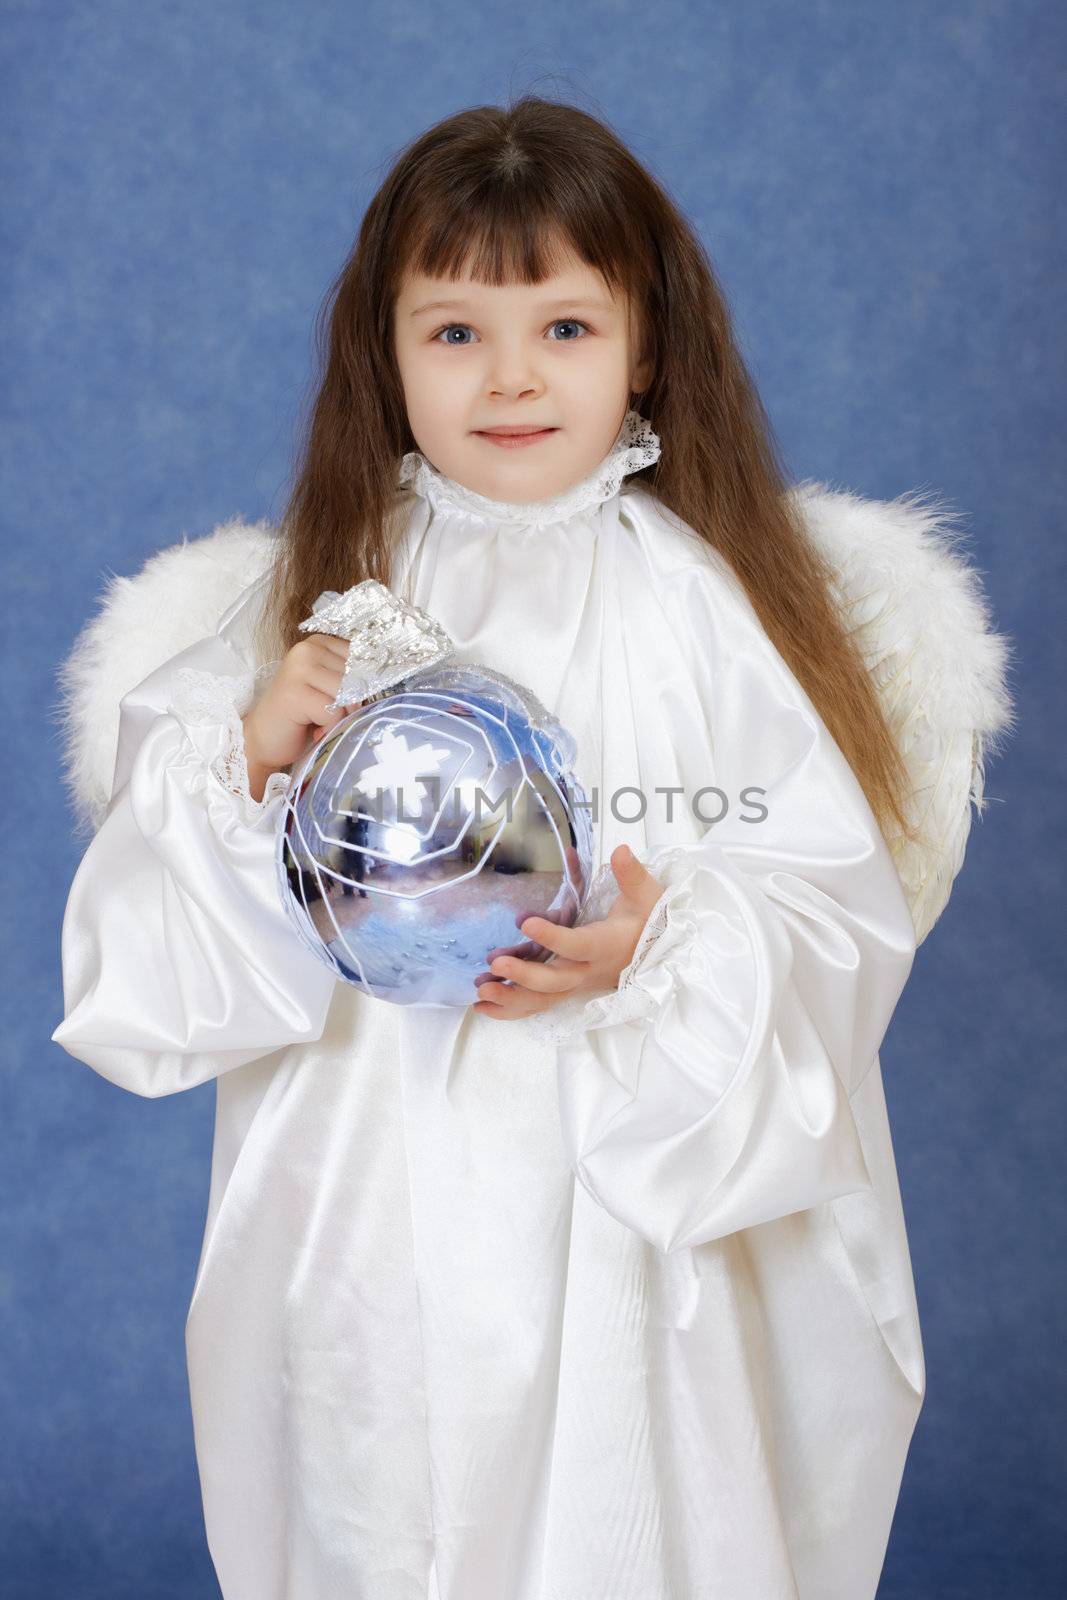 A child dressed as an angel with wings holding a glass ball on blue background